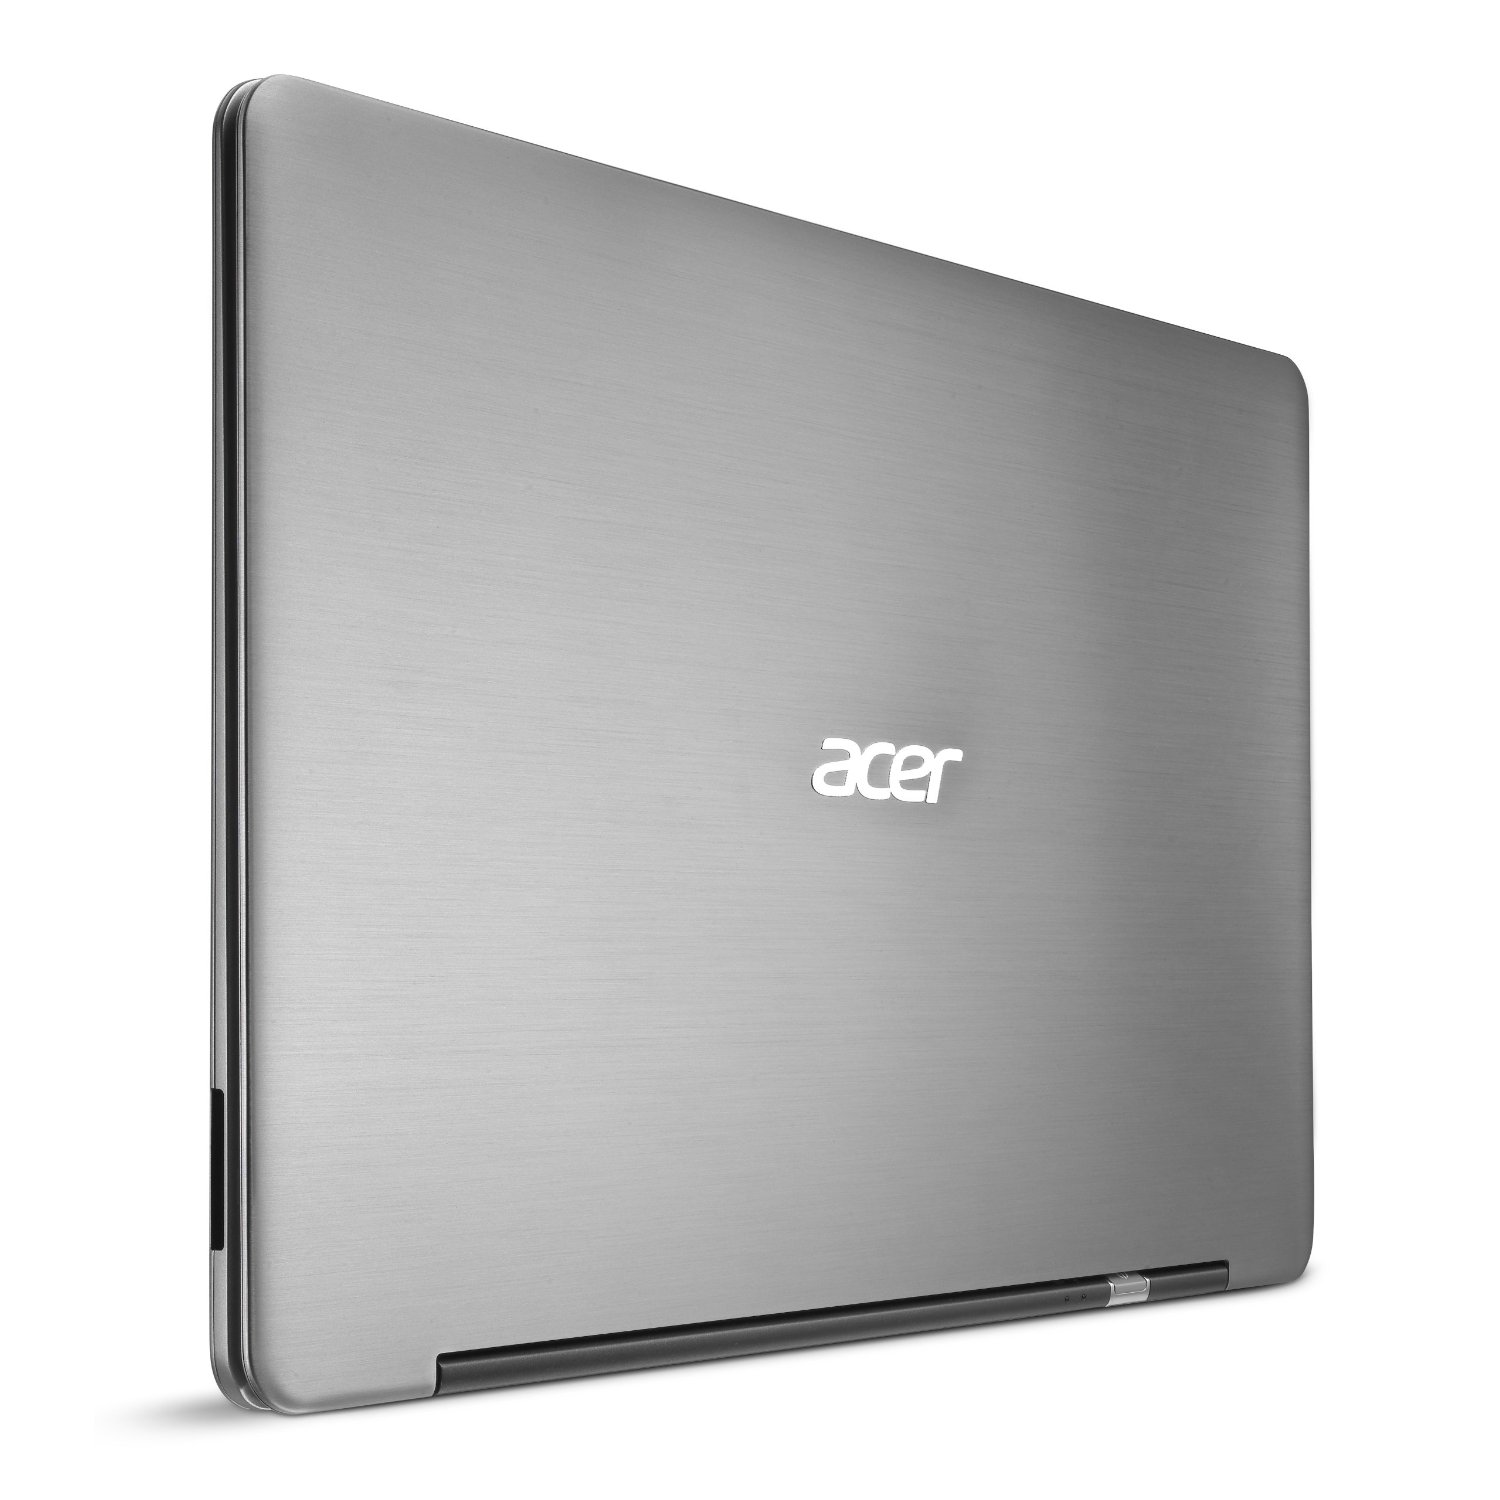 http://thetechjournal.com/wp-content/uploads/images/1110/1318646337-acer-aspire-s39516646-ultrabook-with-133inch-hd-display-11.jpg